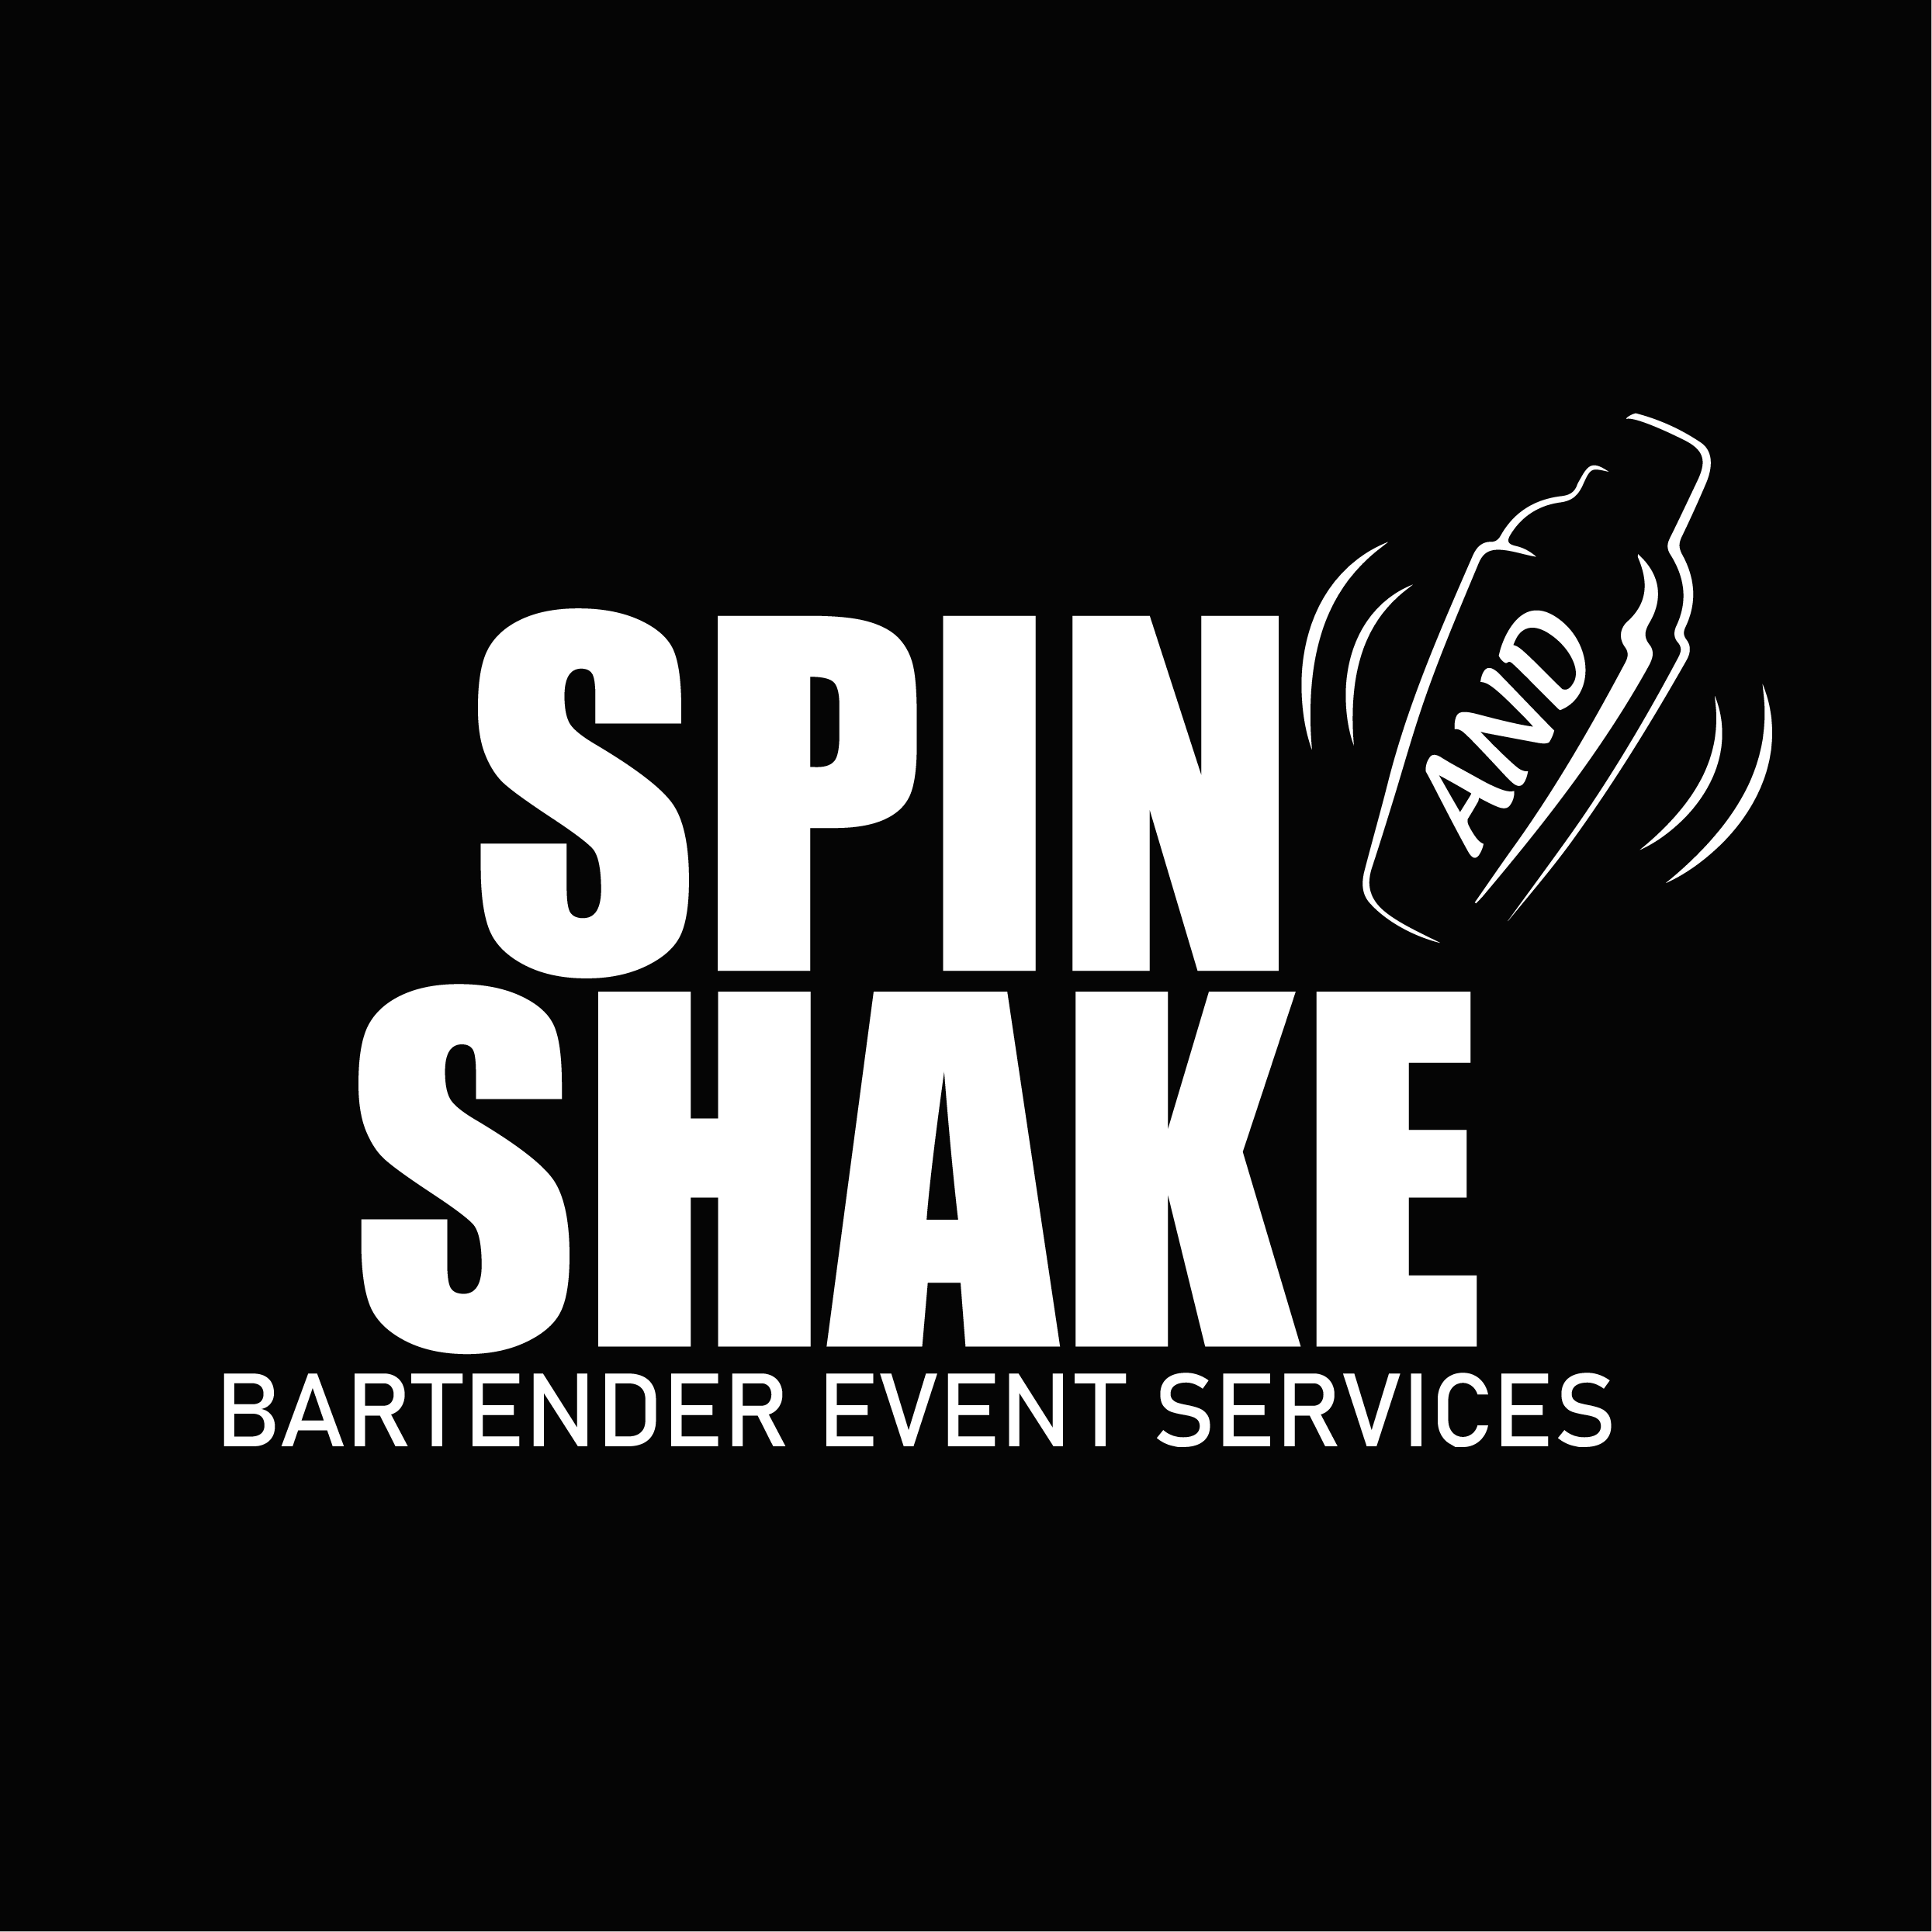 Logo of Spin and Shake Ltd Catering Food And Drink Suppliers In London